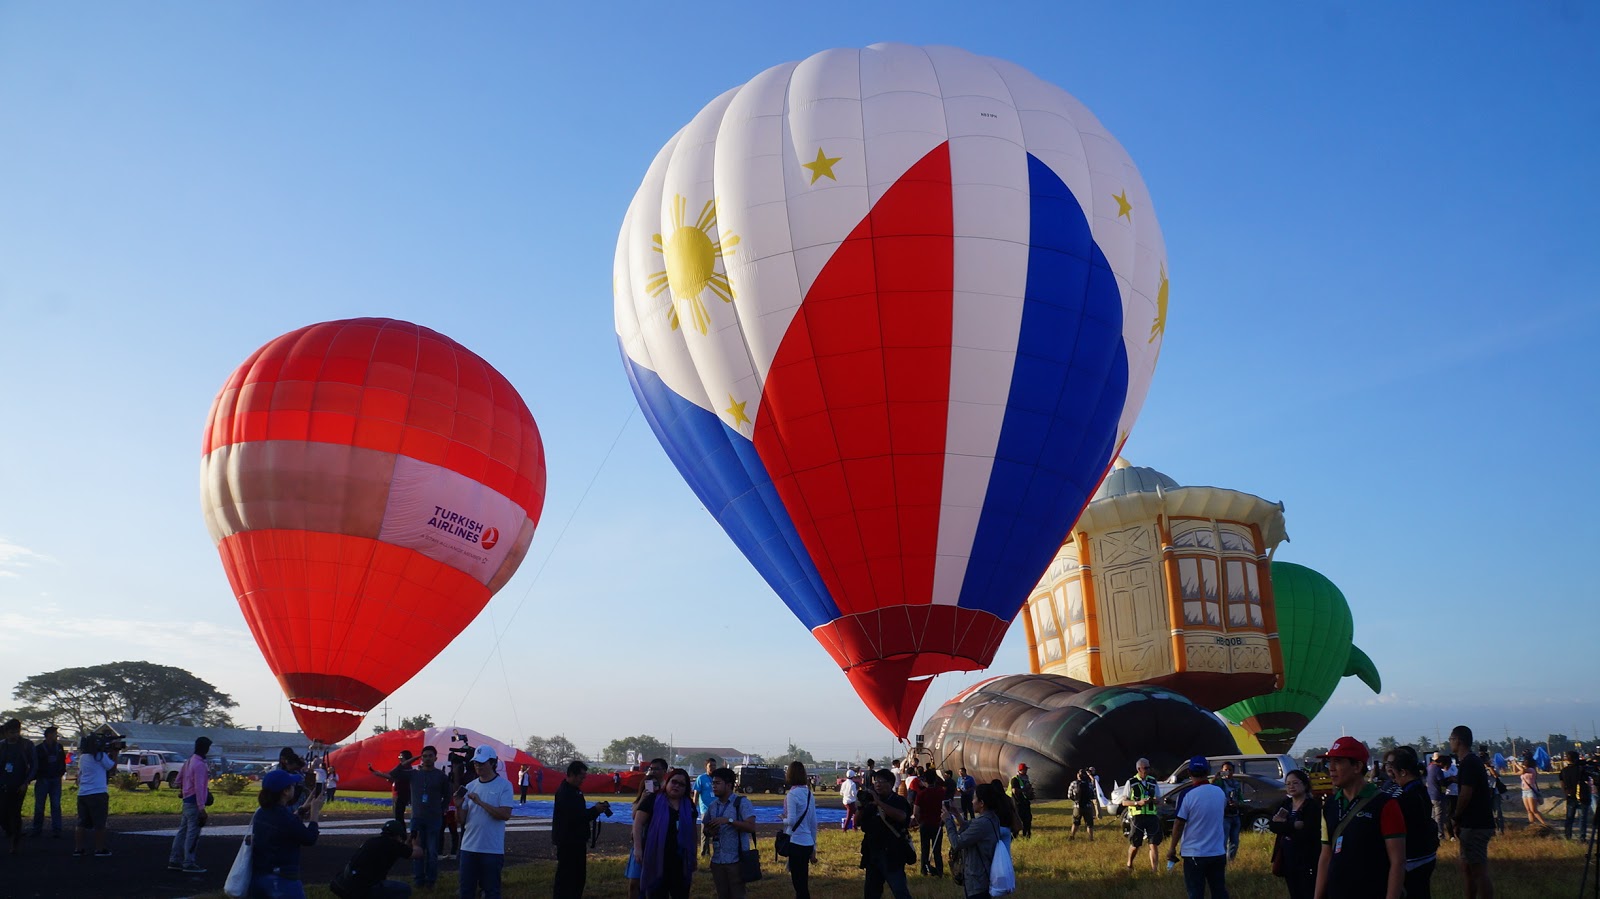 Up In the Air Again at the 21st Philippine International Hot Air